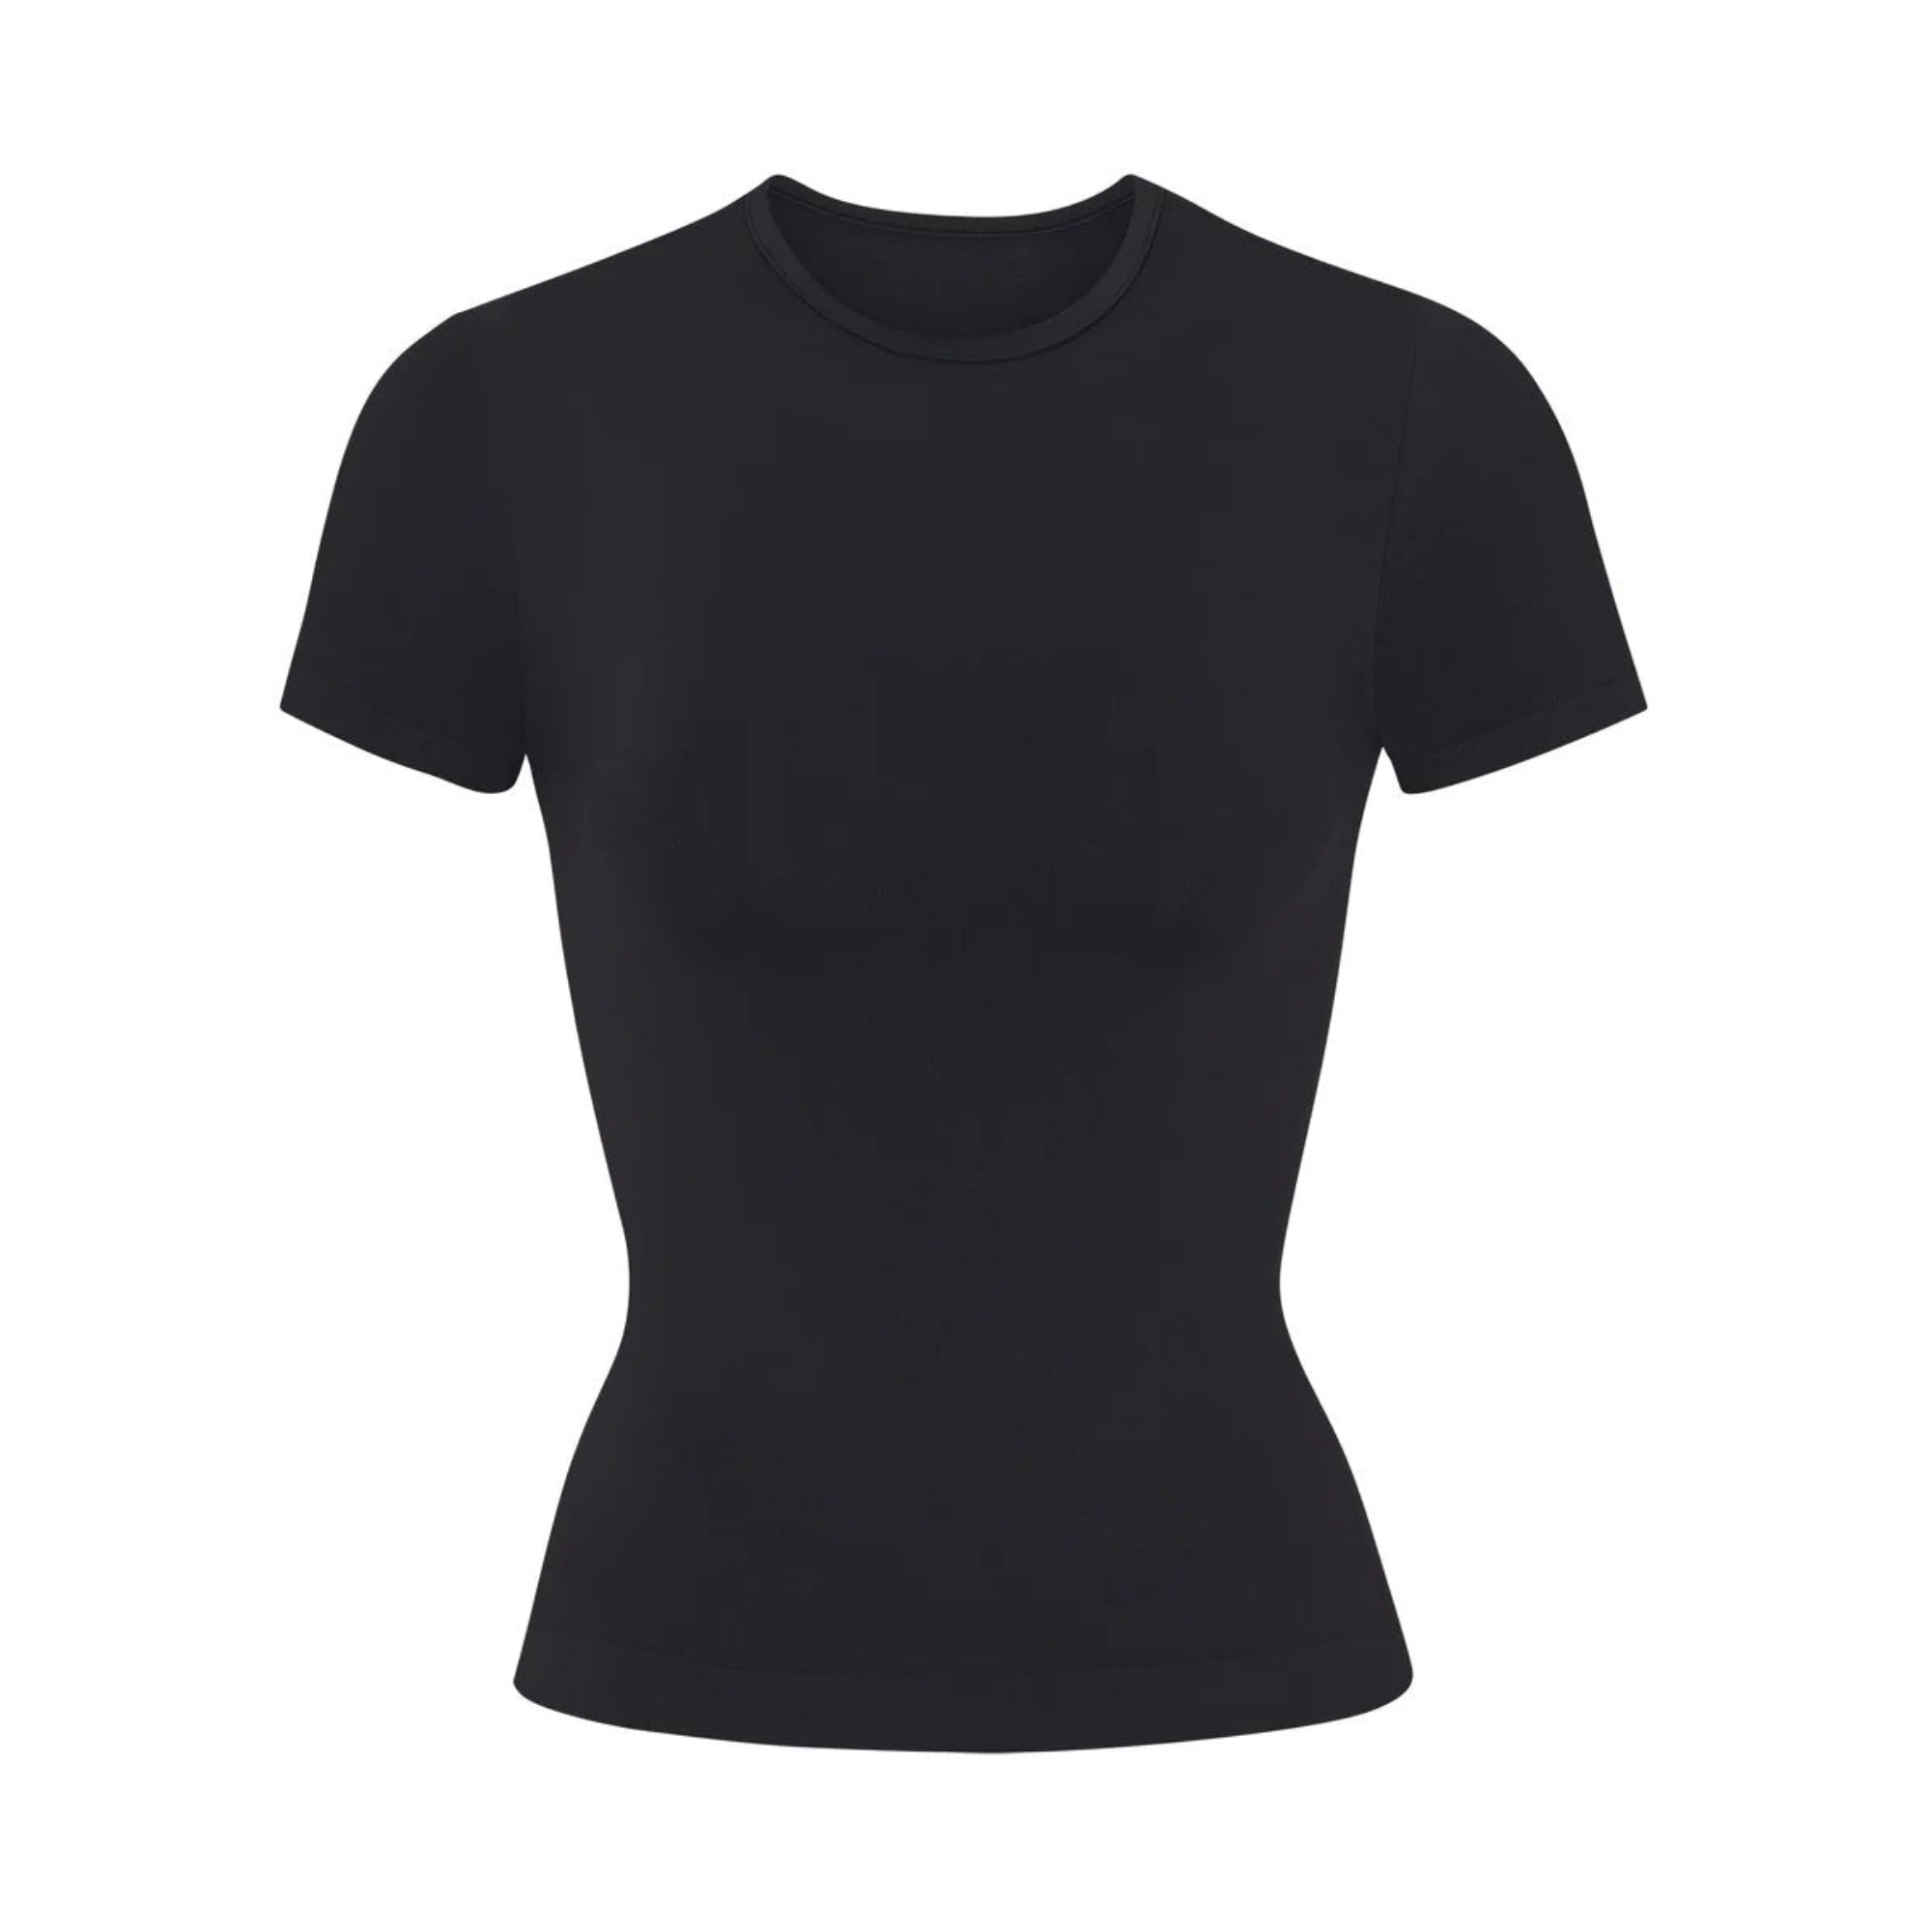 T-Shirts, Women's Tees and Tops